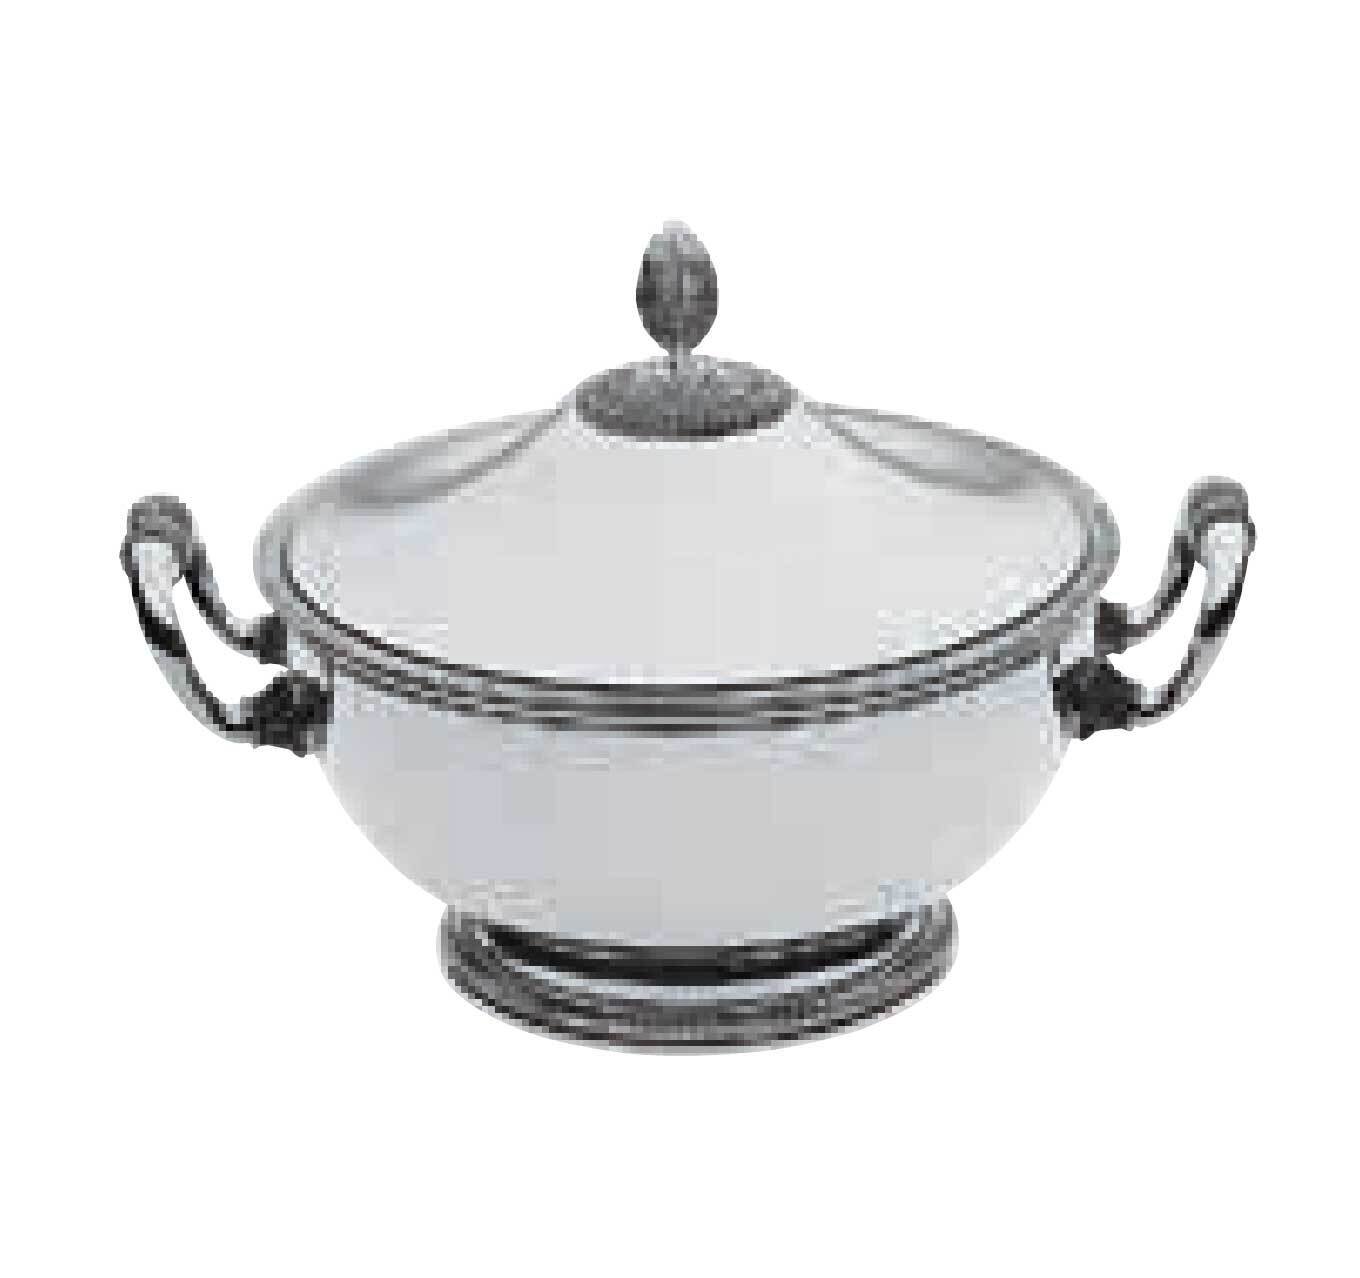 Ercuis Trianon Soup Tureen 9.5 Inch Silver Plated F51T200-24